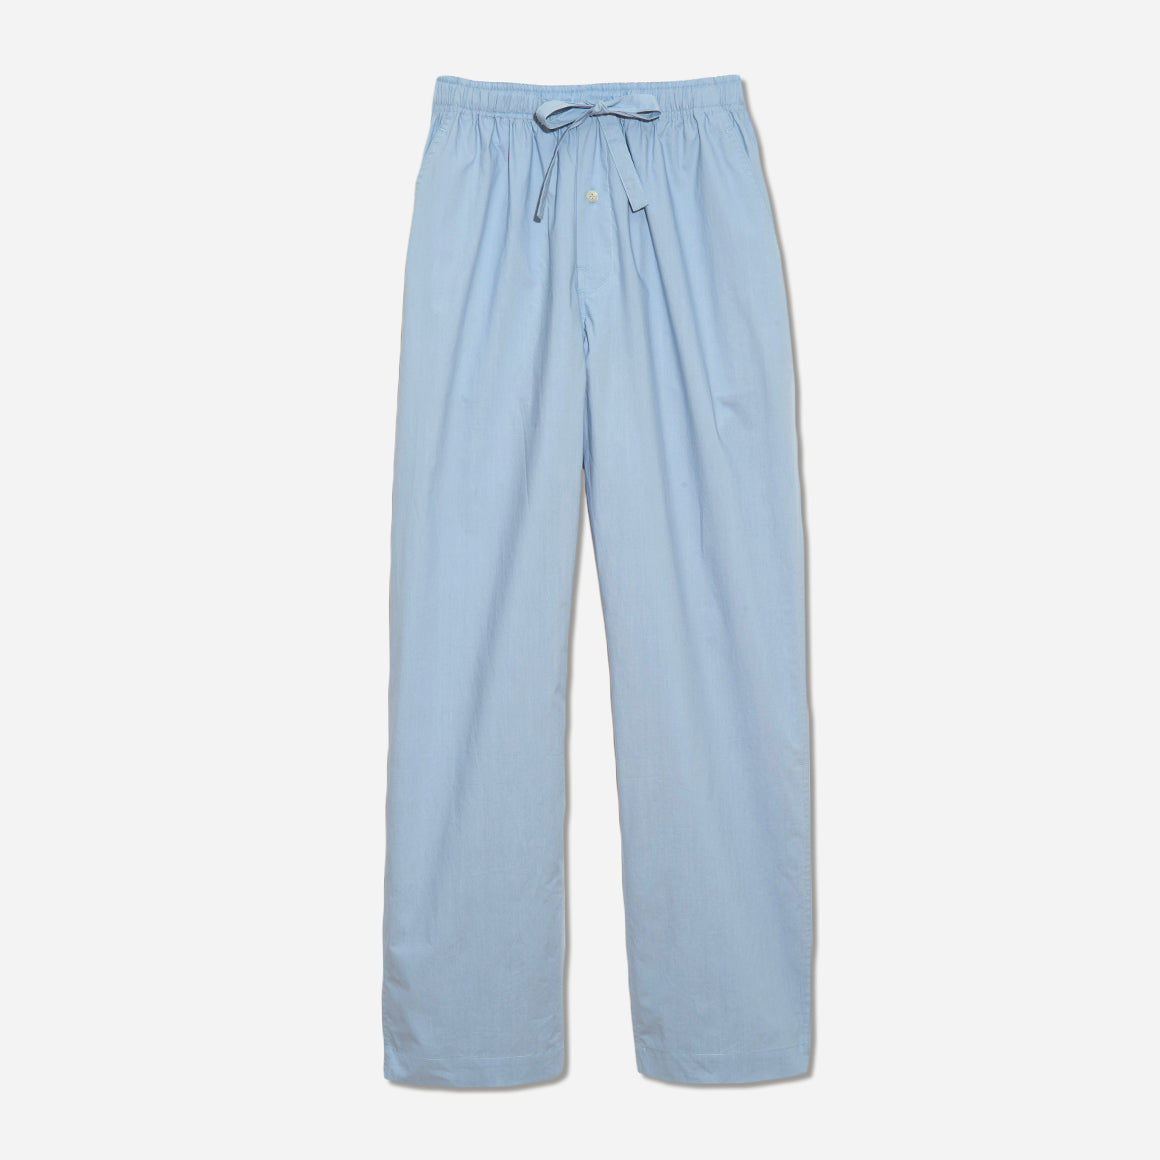 Our organic cotton pajama pants feature a relaxed fit, providing ample room for movement and comfort while you sleep. The soft elastic waistband, drawstring, button fly, and side-seam pockets make this the perfect lounge pant for relaxing at home.